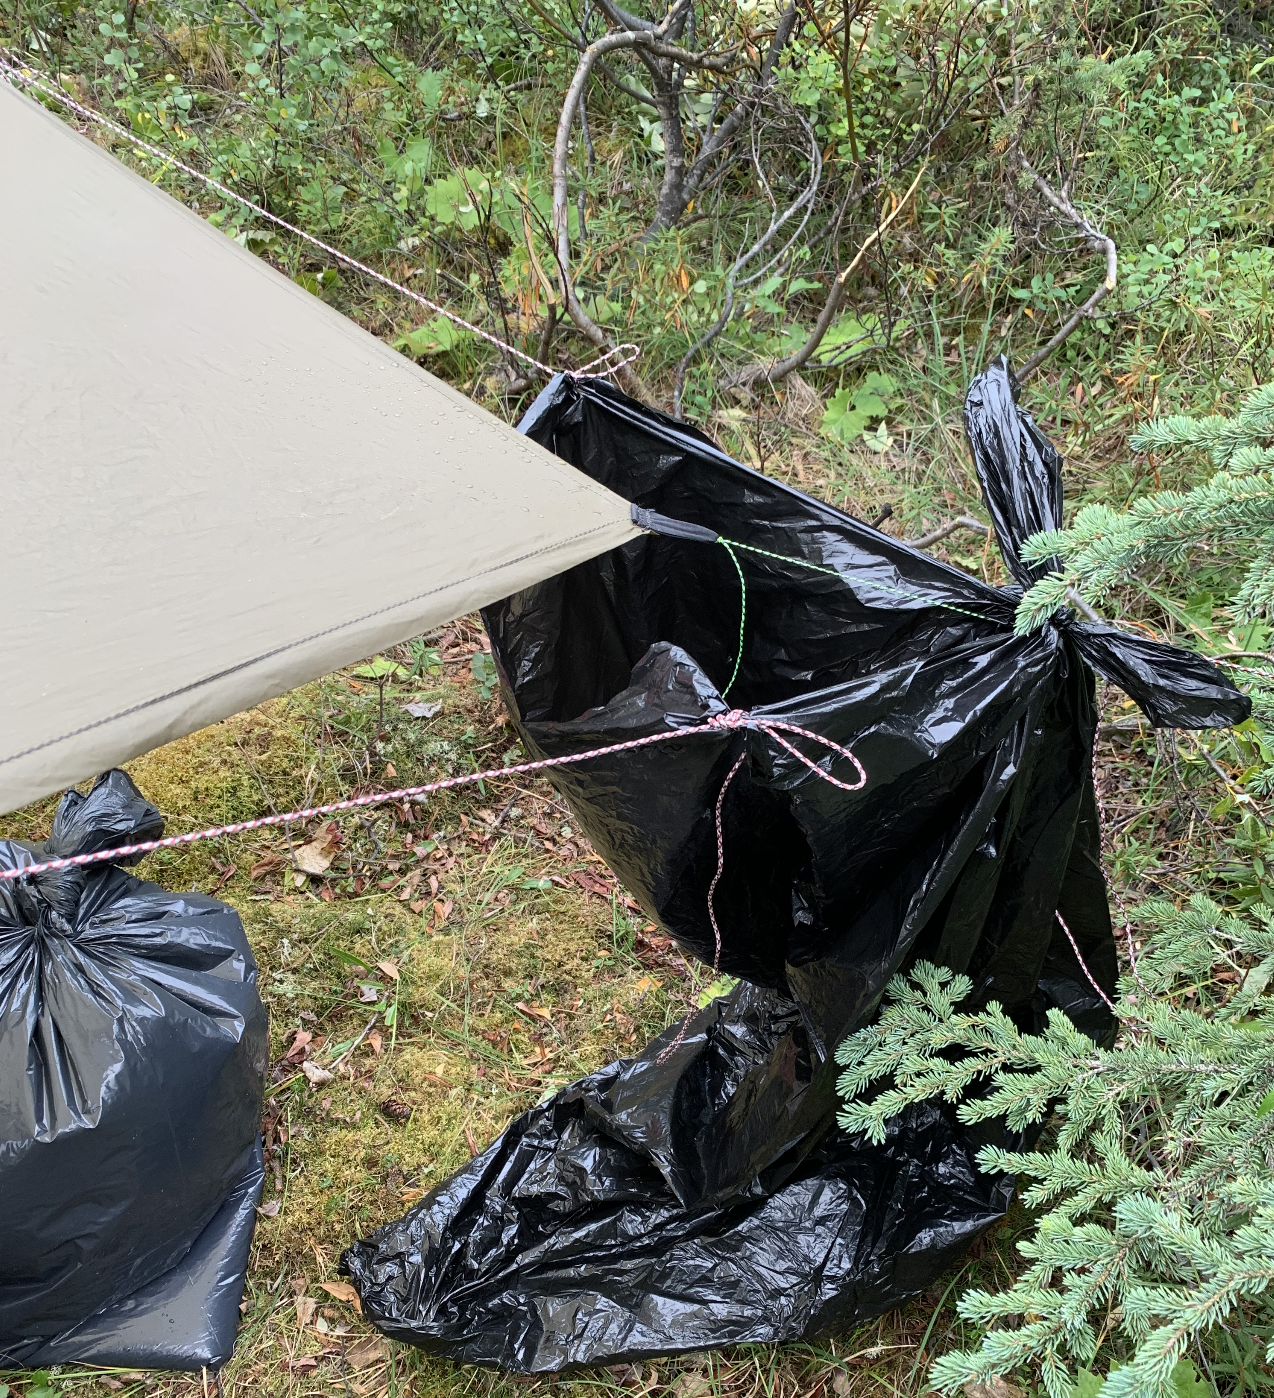 You can catch rainwater off your tent in the backcountry with this system.